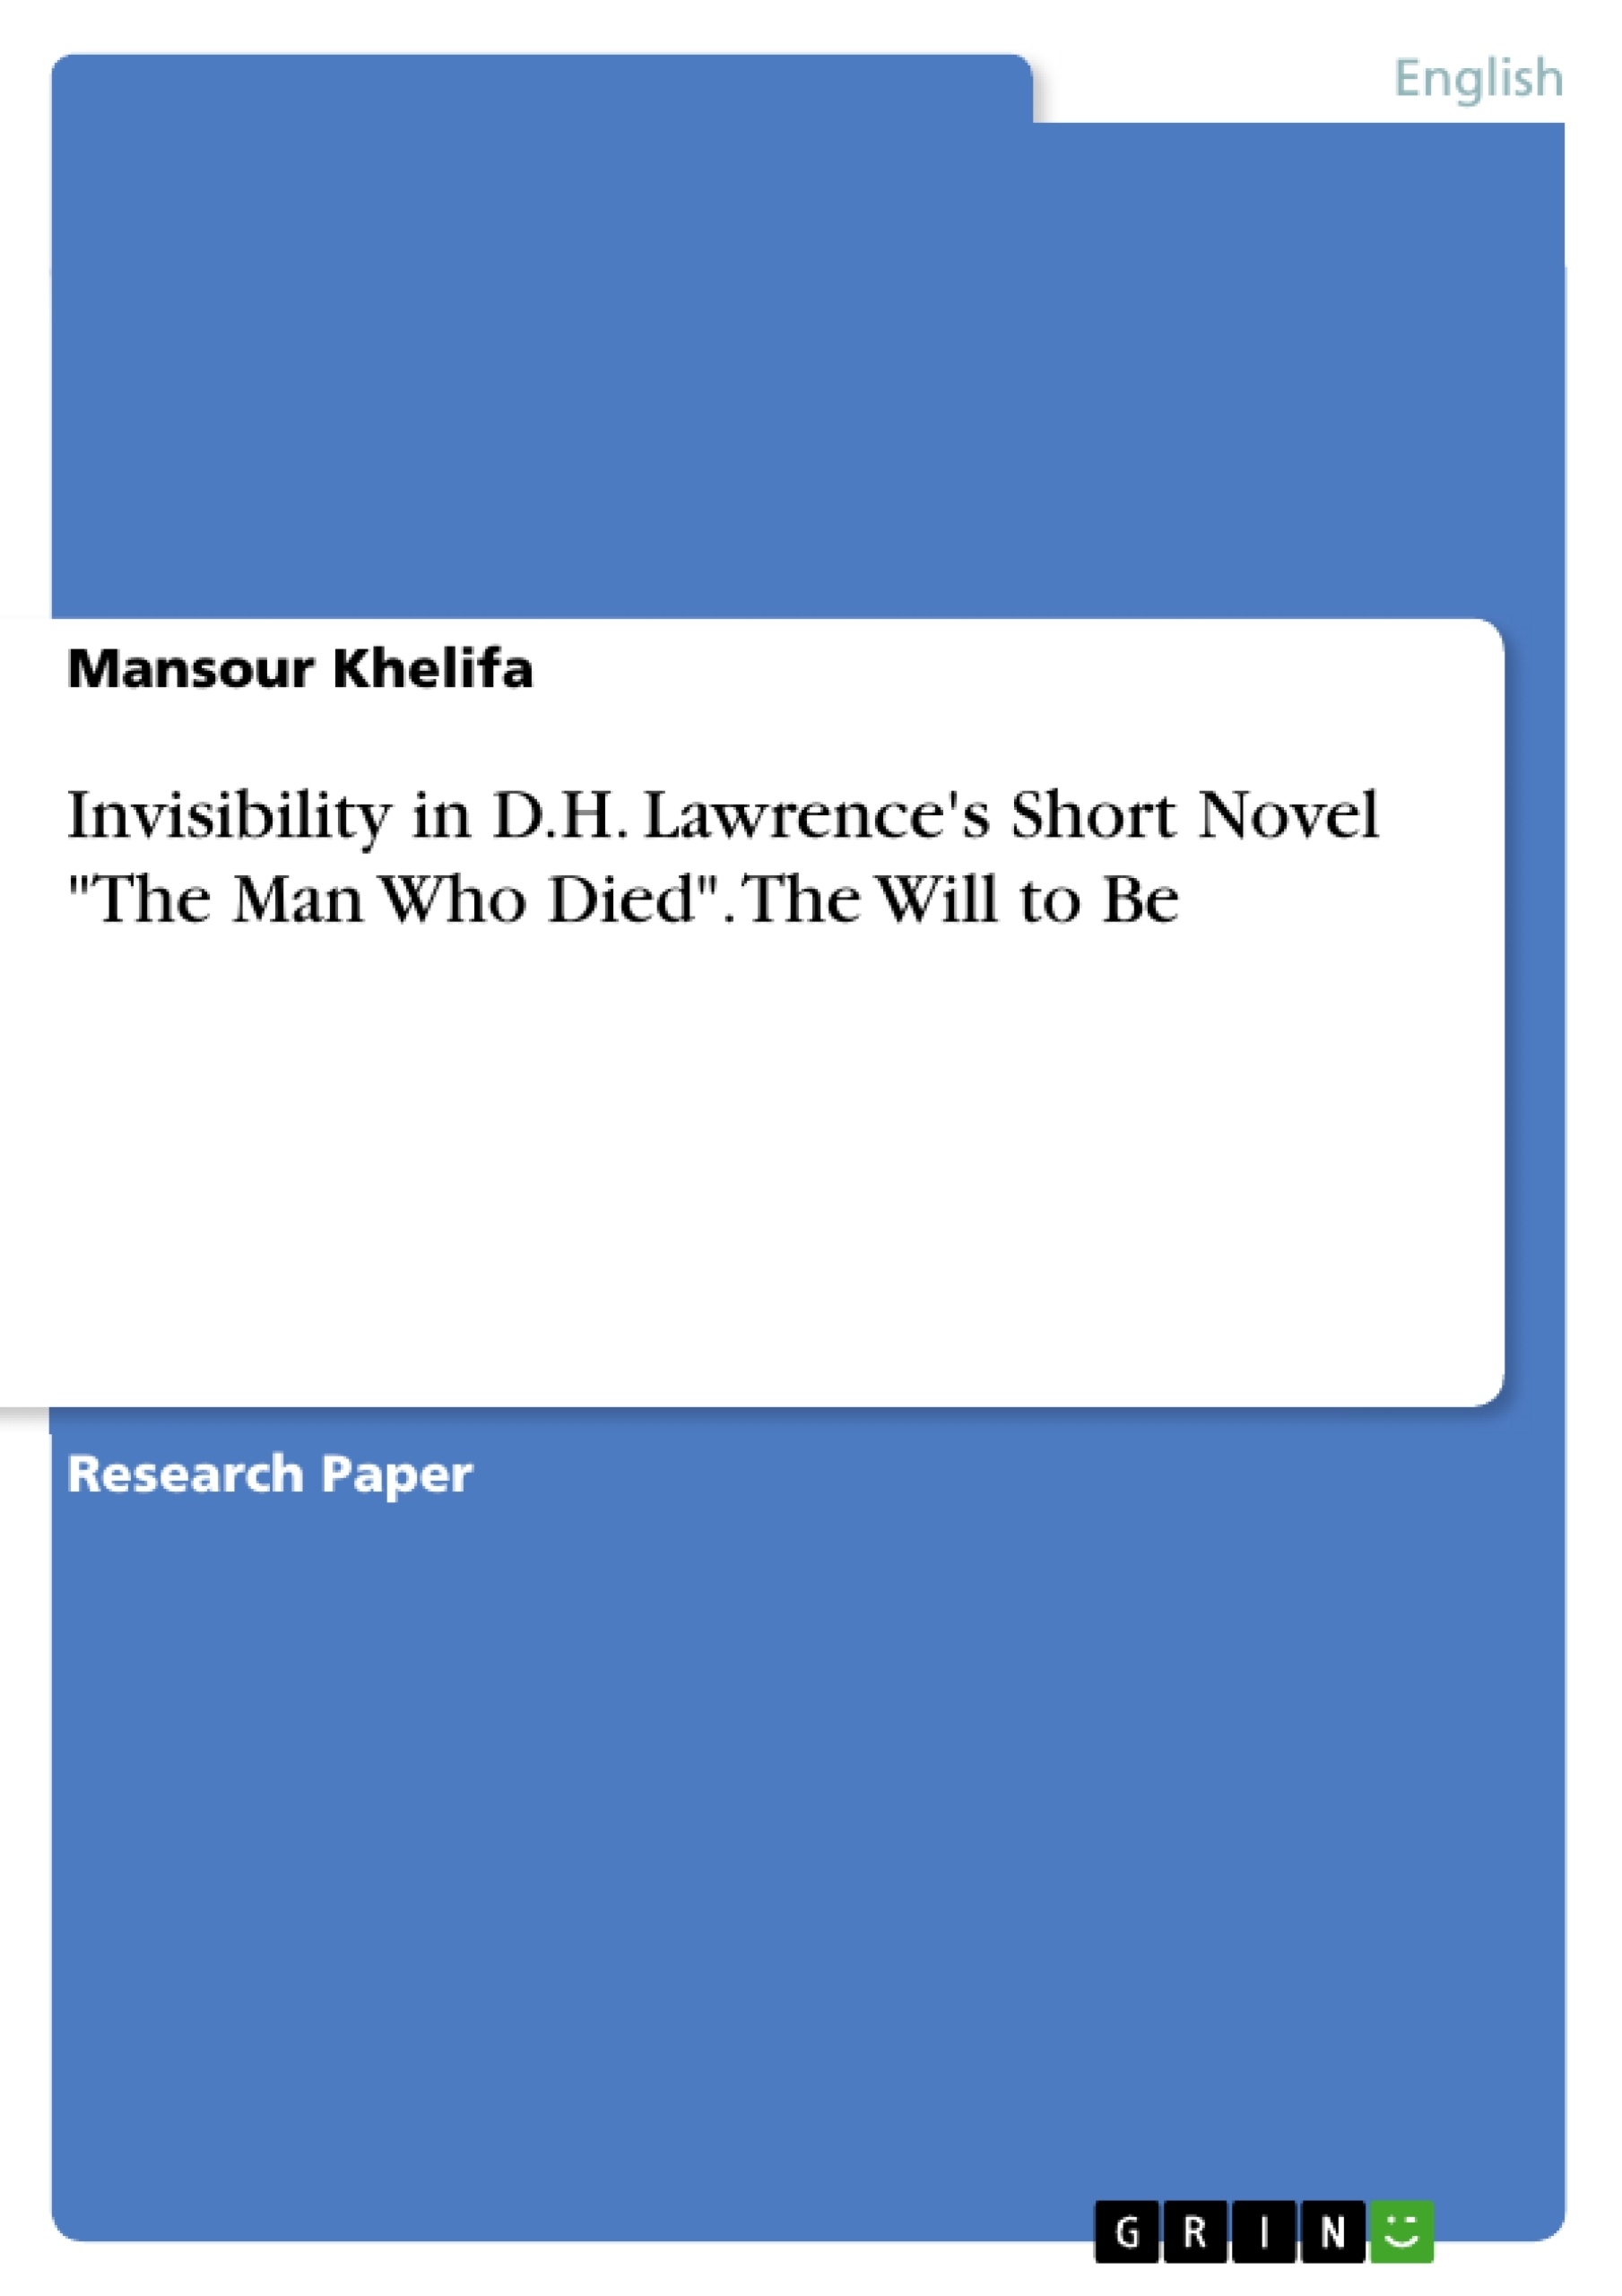 Title: Invisibility in D.H. Lawrence's Short Novel "The Man Who Died". The Will to Be